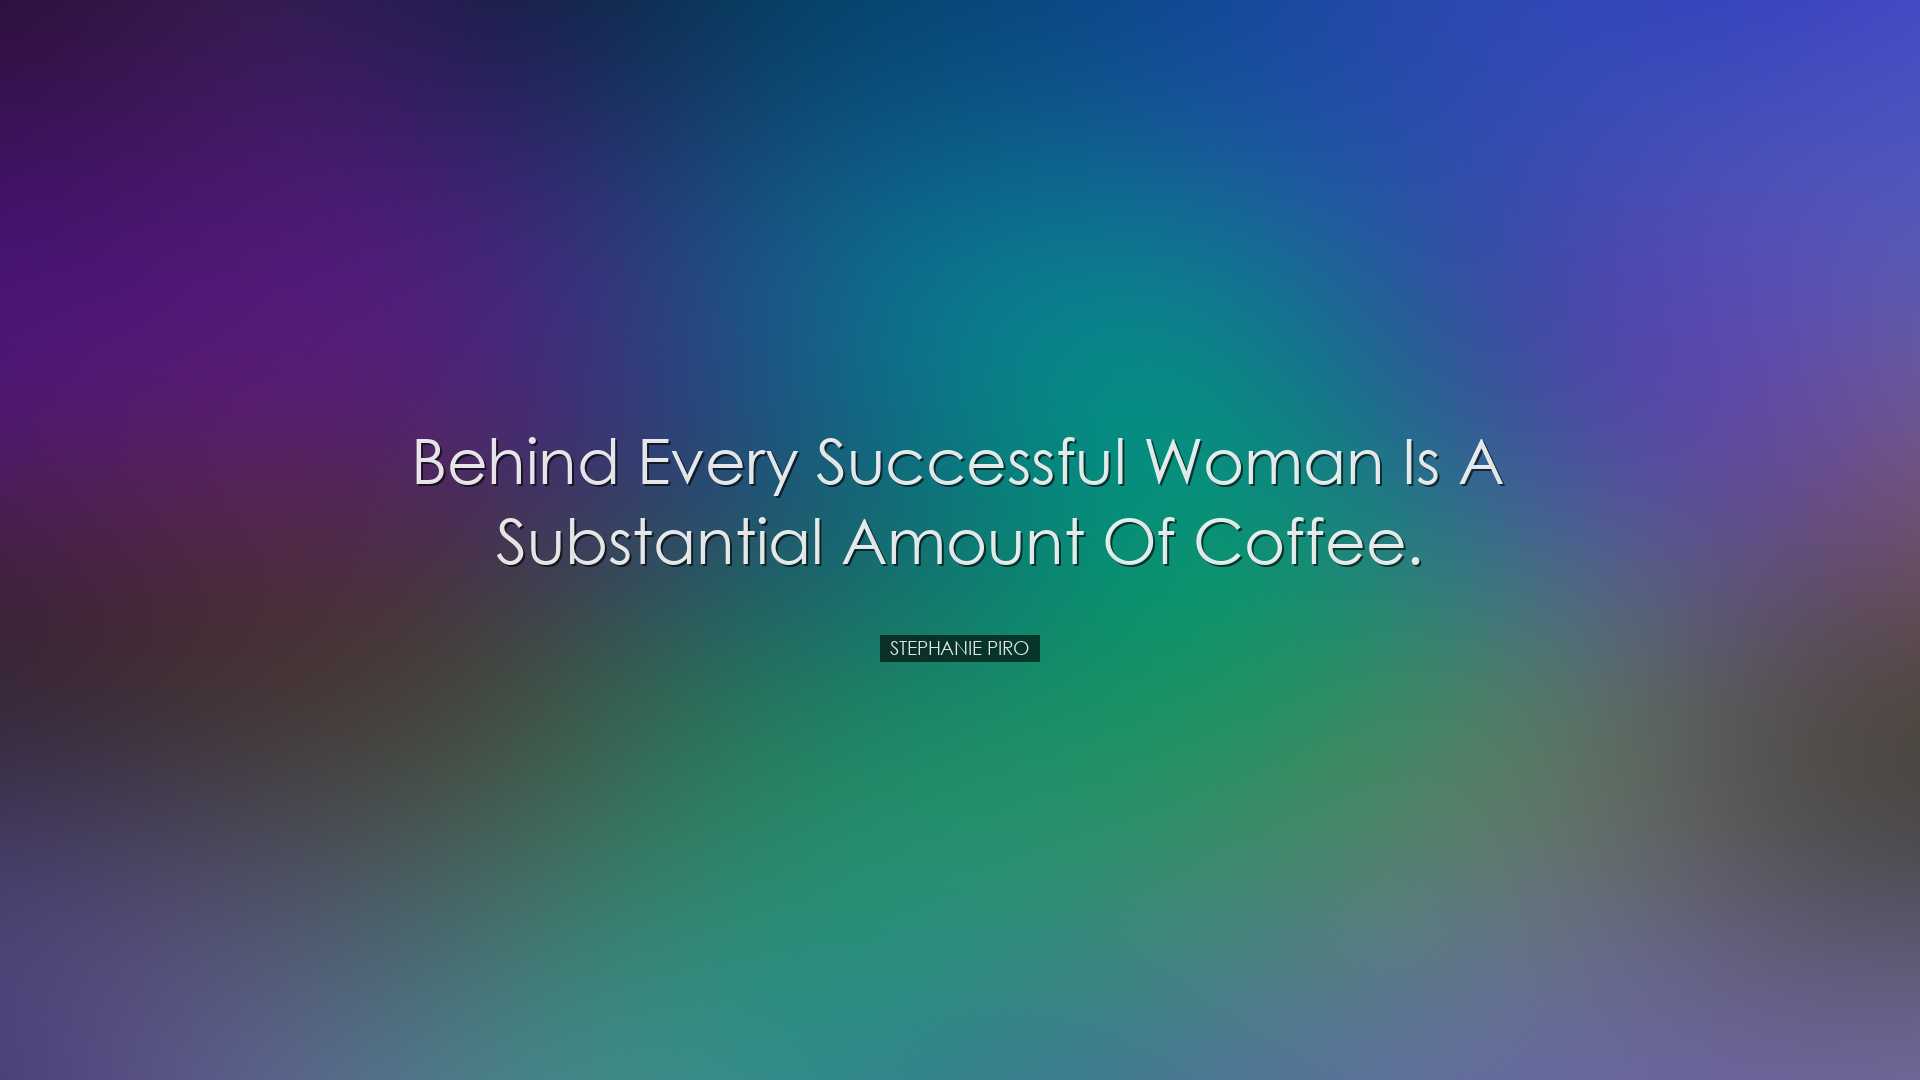 Behind every successful woman is a substantial amount of coffee. -